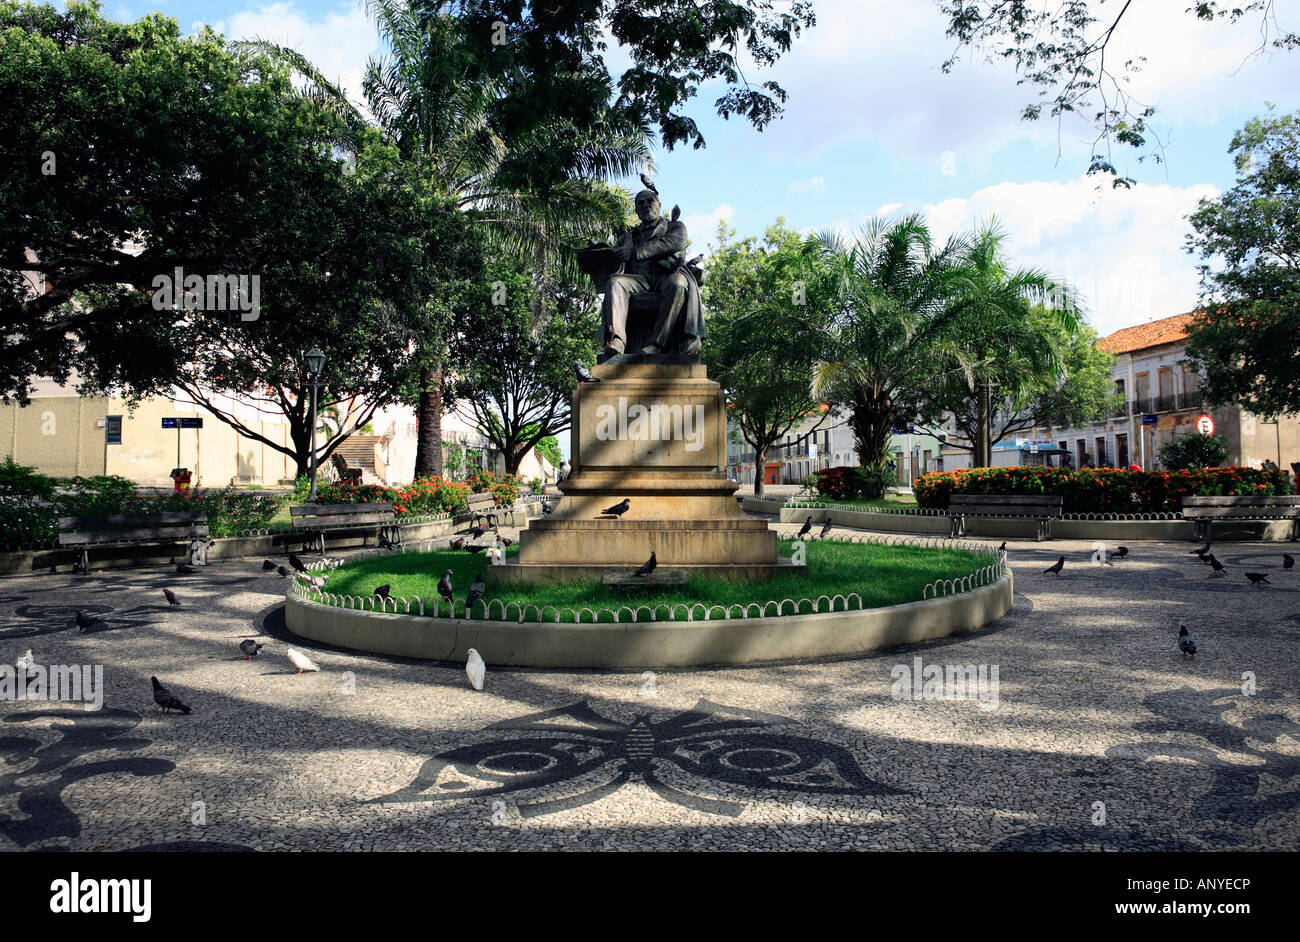 view of the historic center of the city of sao luis of maranhao in brazil Stock Photo